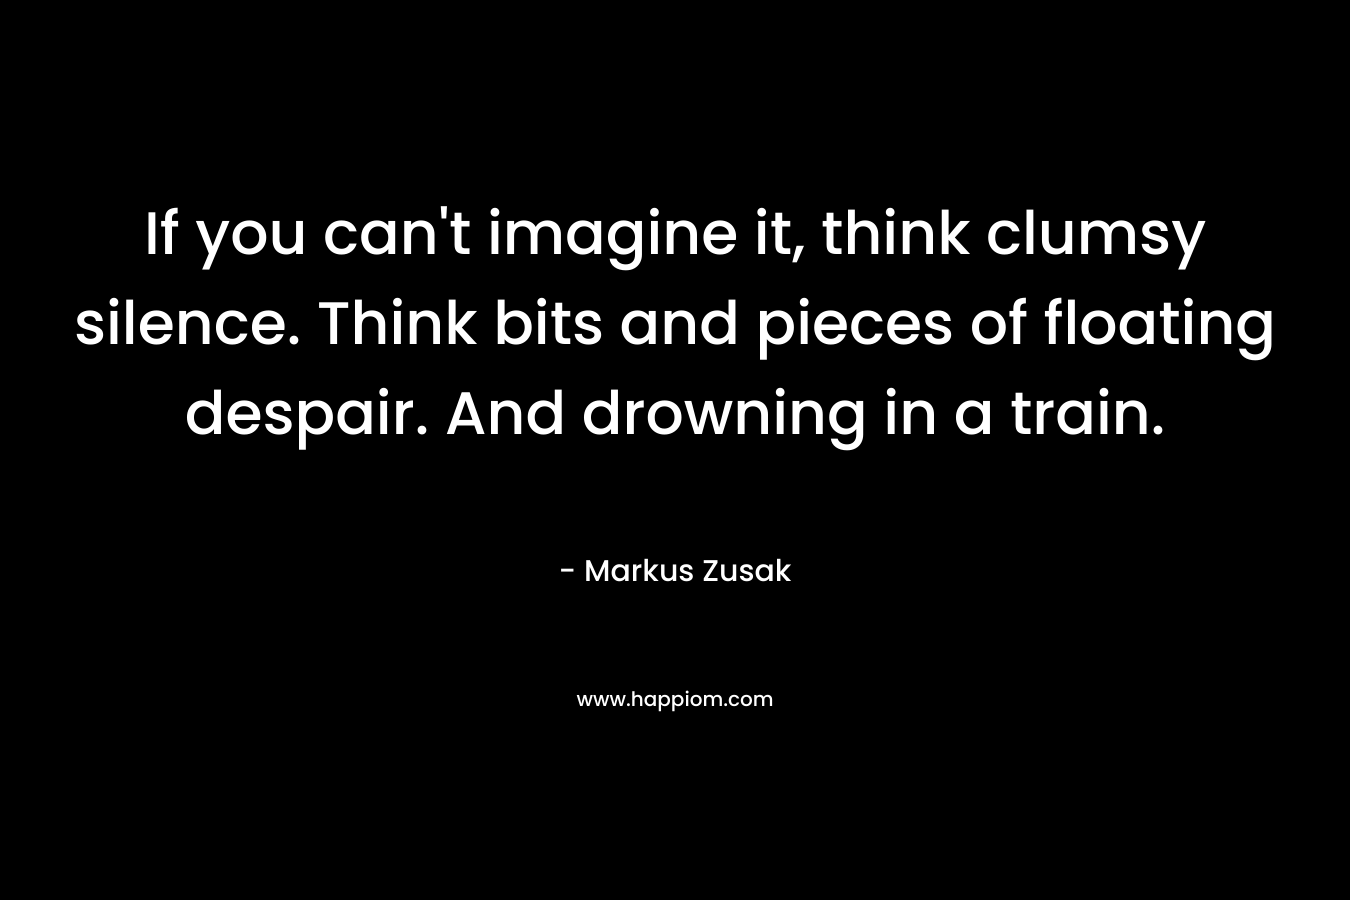 If you can’t imagine it, think clumsy silence. Think bits and pieces of floating despair. And drowning in a train. – Markus Zusak